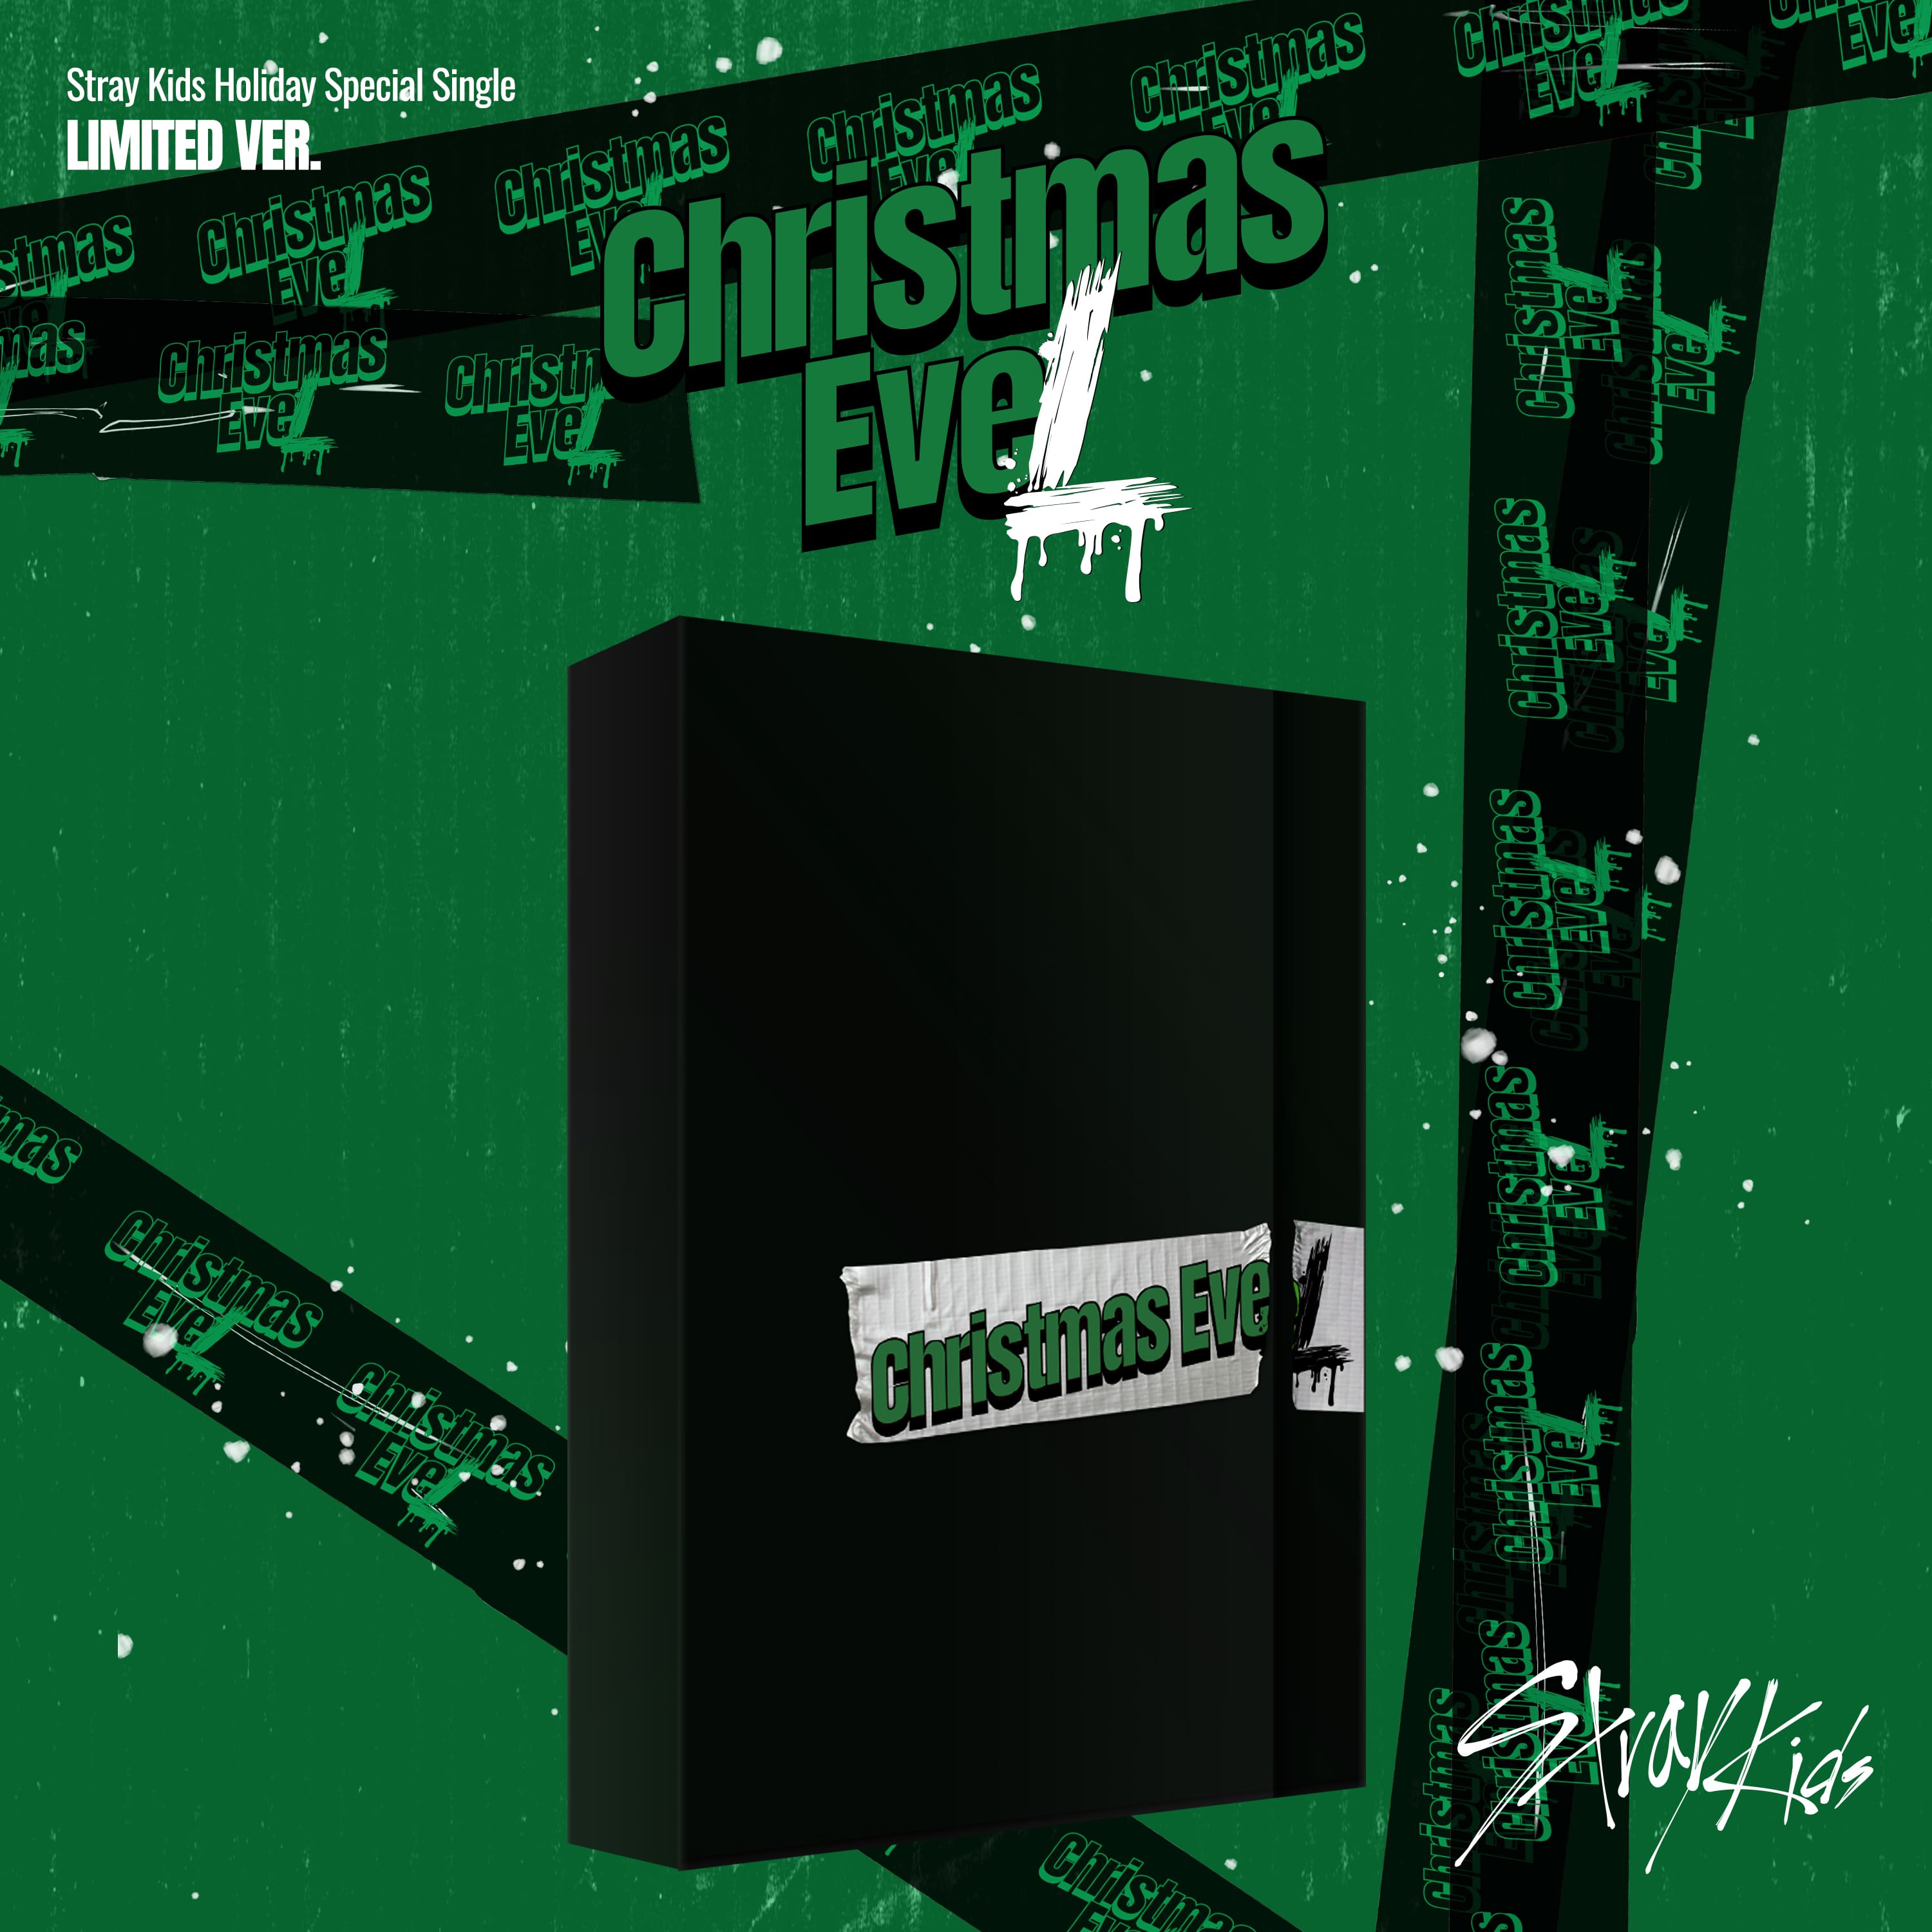 Stray Kids - Christmas EveL (LIMITED VER)